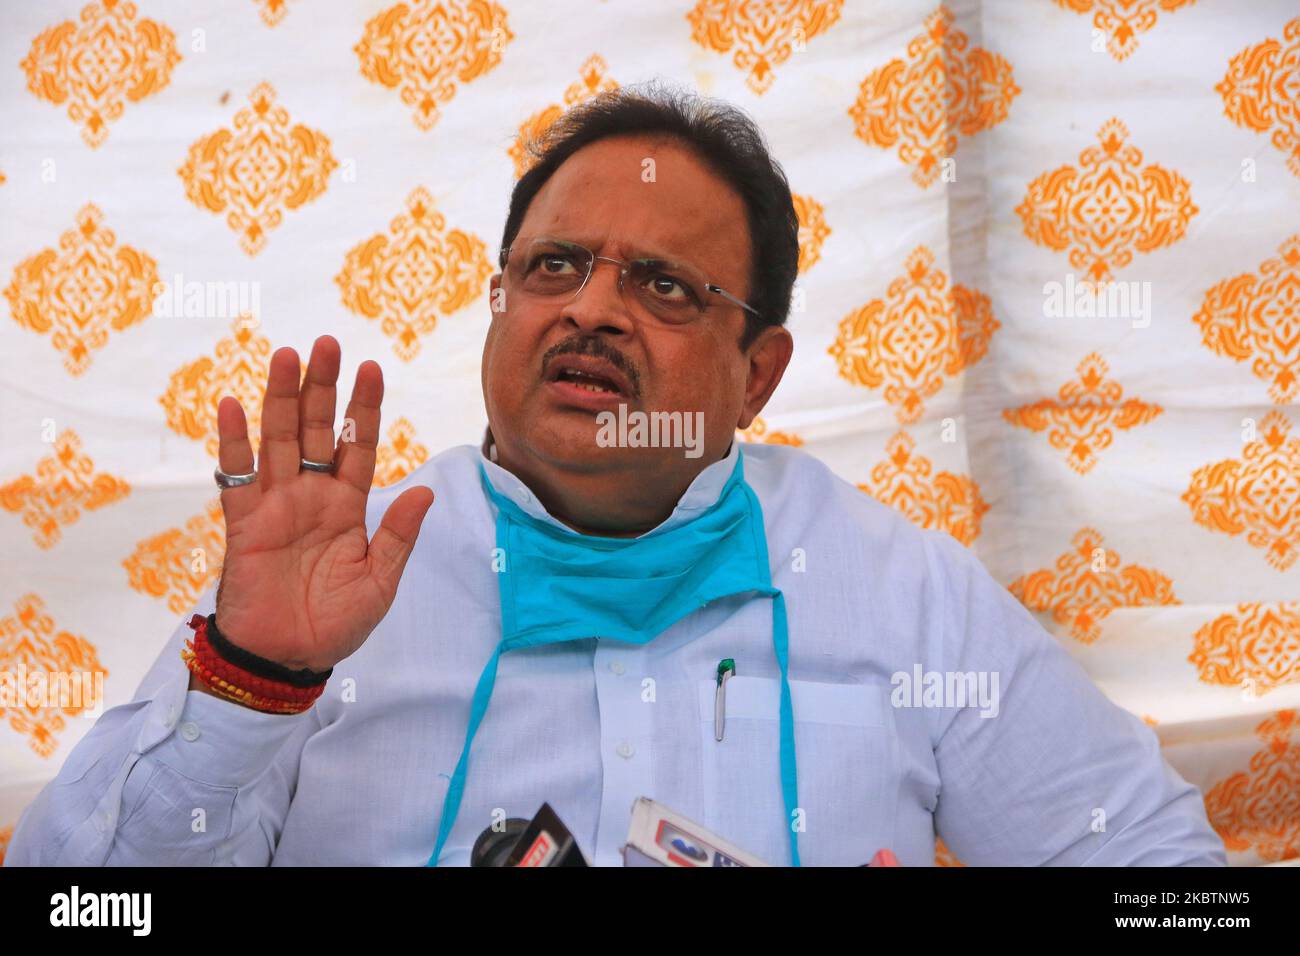 Rajasthan Health Minister Raghu Sharma addresses media over the MLAs horse trading and congress party politics crisis , outside a hotel where Congress leaders and MLA are staying in Jaipur, Rajasthan, India, on July 16, 2020. (Photo by Vishal Bhatnagar/NurPhoto) Stock Photo